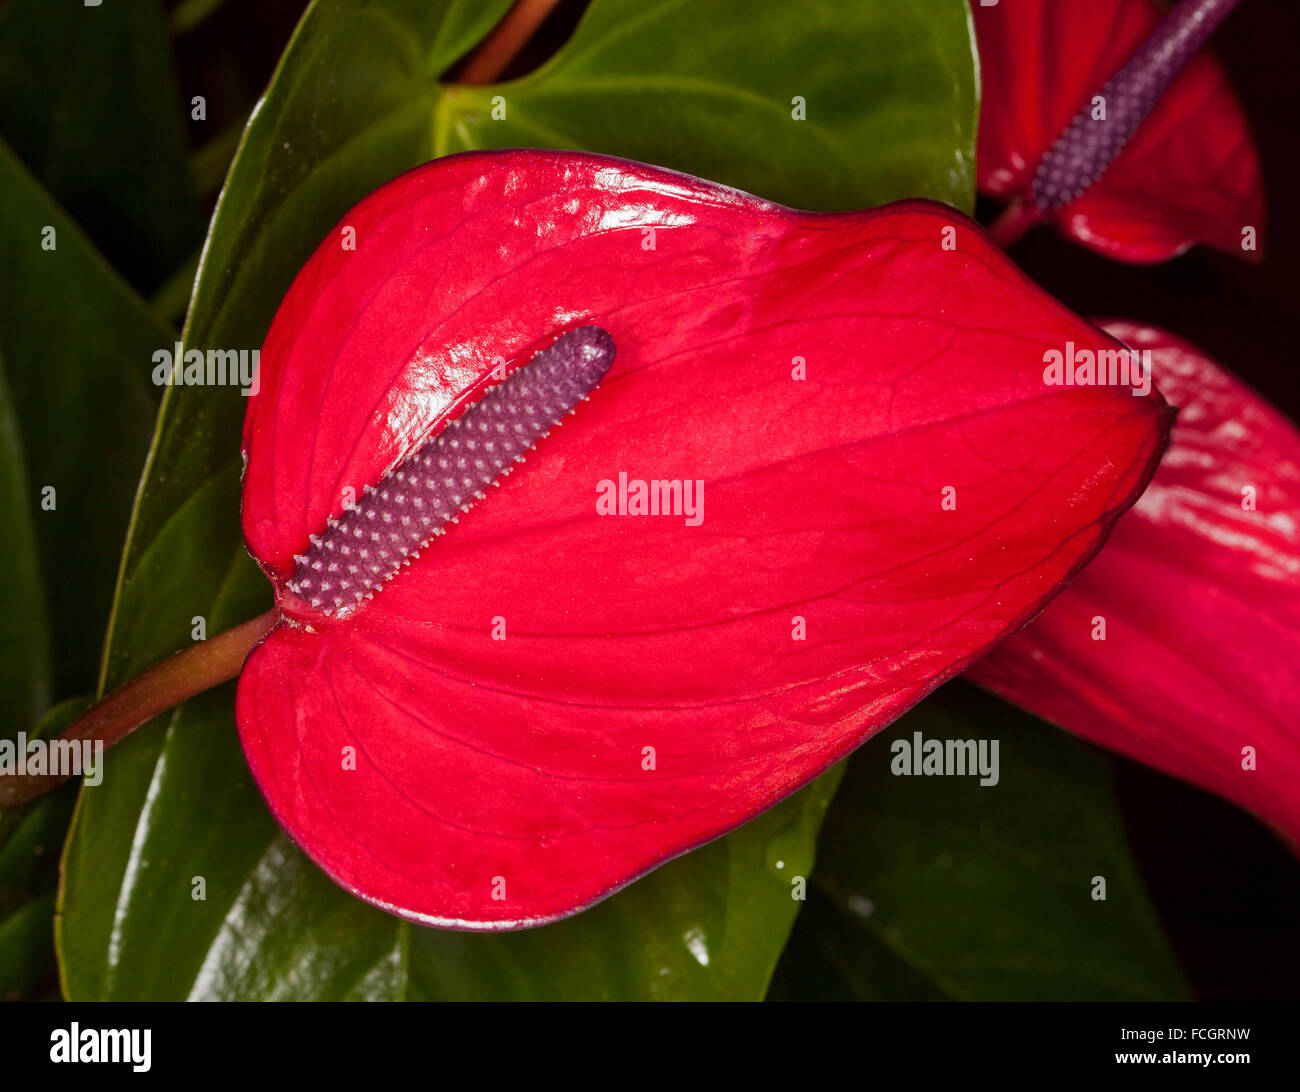 Spectacular Anthurium andreanum cultivar 'Purple Anouk' with vivid red spathe, purple spadix and dark green leaves on dark background Stock Photo